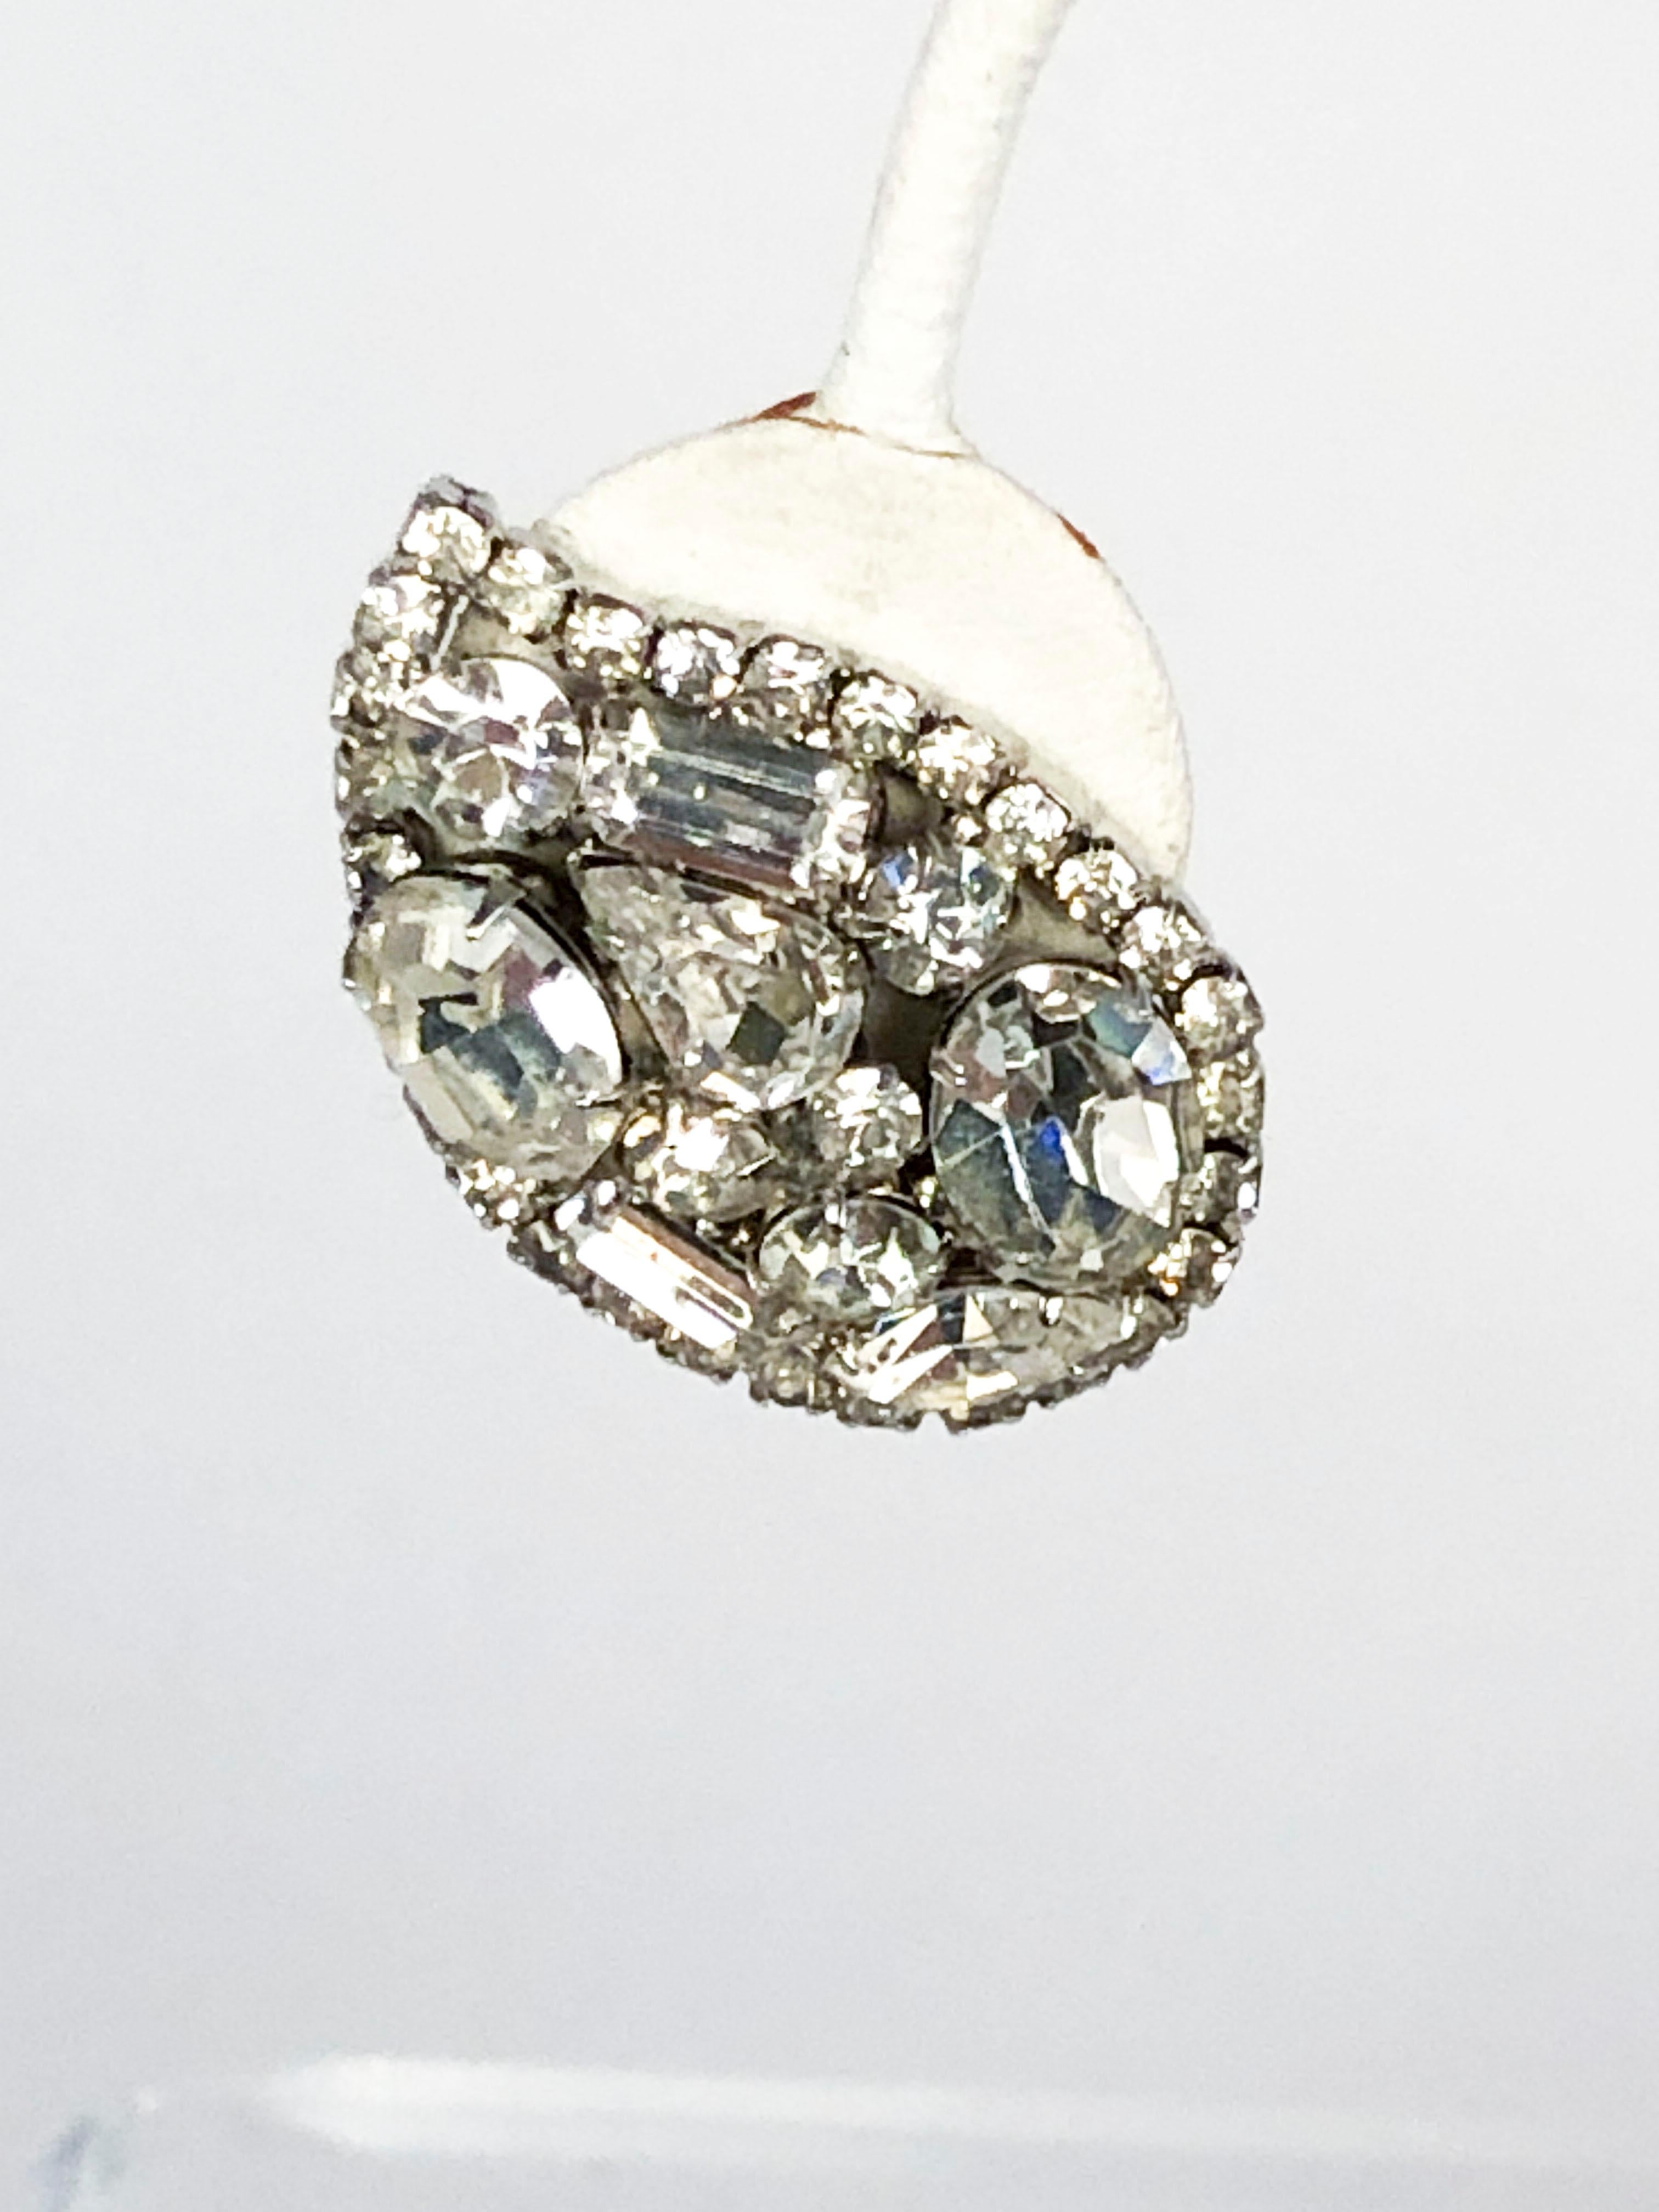 1950s Vendome clip-on earrings with multi-cut/multi-sized clear rhinestones set in a setting metal with a silver wash. The Rhinestones are configured into a teardrop shape to accentuate the shape of the ear. The clips have a screw to adjust the